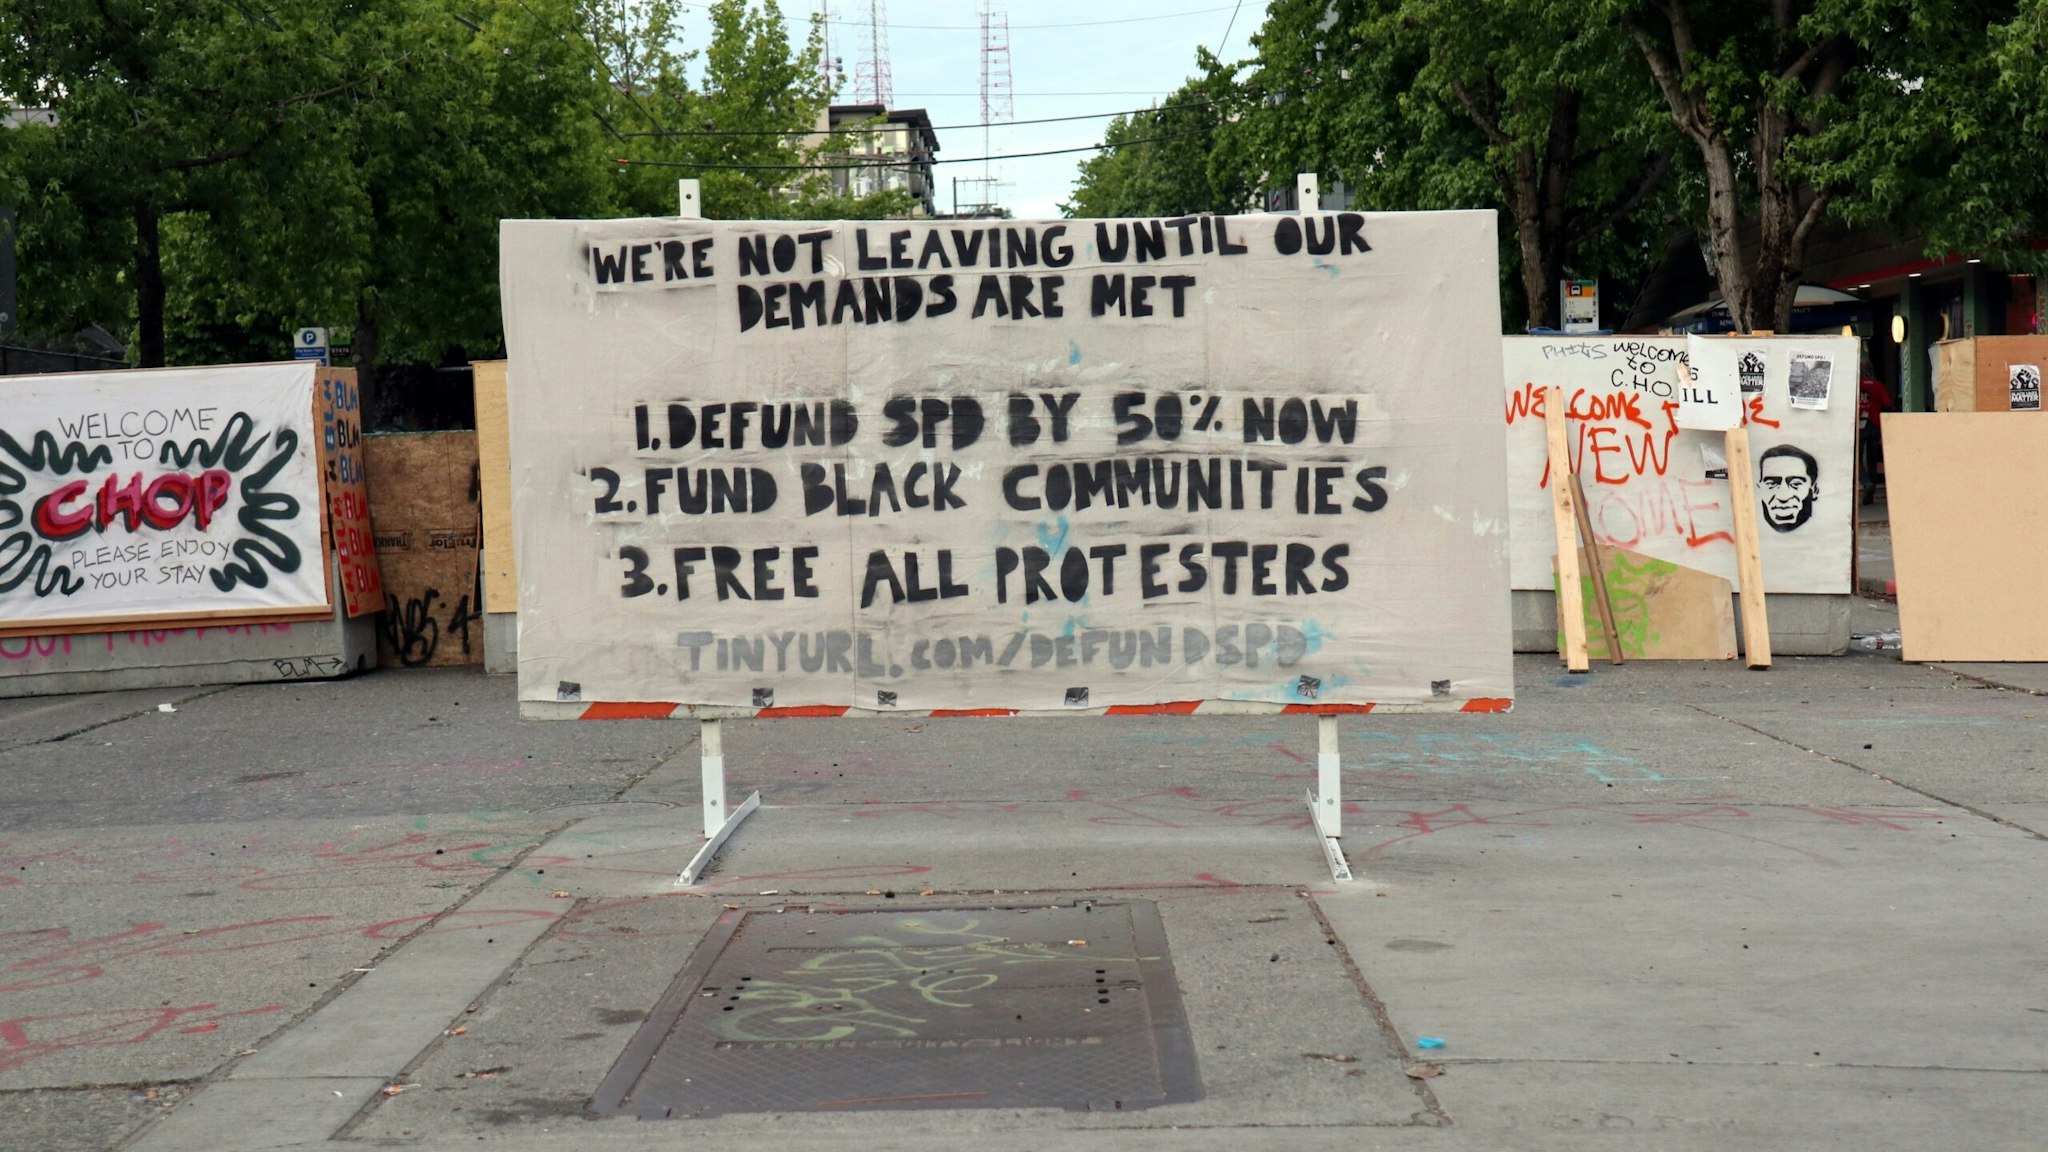 SEATTLE, WASHINGTON, UNITED STATES - 2020/06/23: A placard seen outside the western wall of Seattle's Capitol Hill Occupied Protest (CHOP) zone lists protester demands. Facing increasing pressure from residents and business owners, Mayor Jenny Durkan on Monday vowed to retake the police station she previously ordered surrendered. (Photo by Toby Scott/SOPA Images/LightRocket via Getty Images)